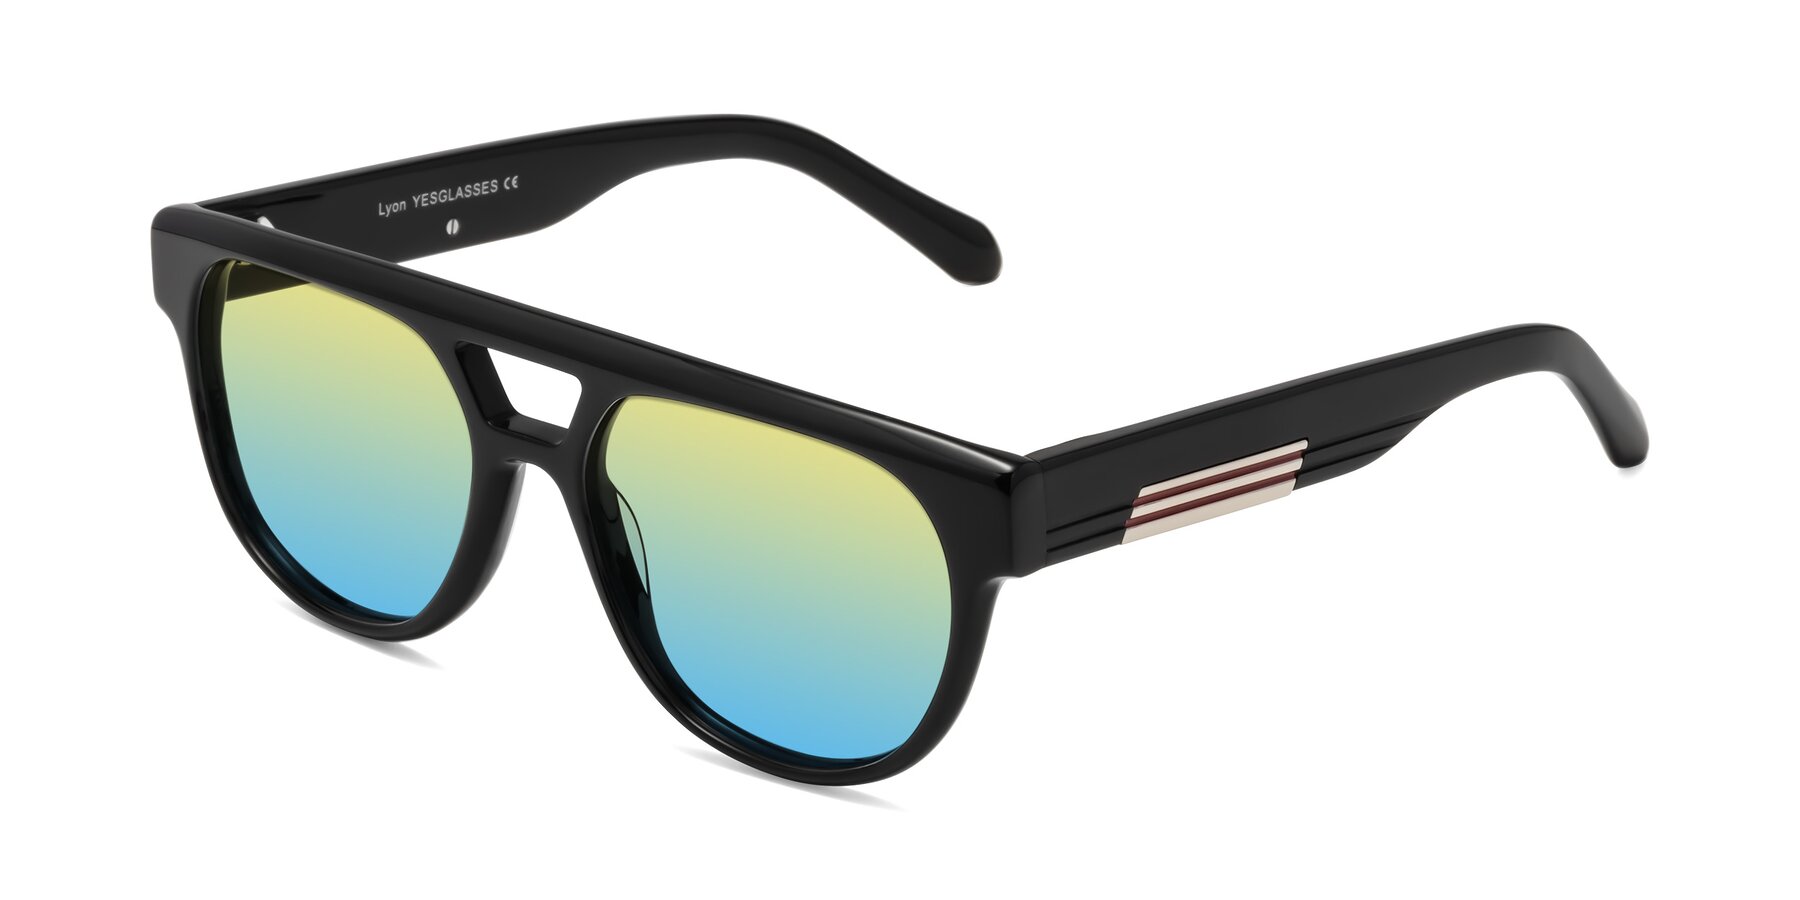 Angle of Lyon in Black with Yellow / Blue Gradient Lenses